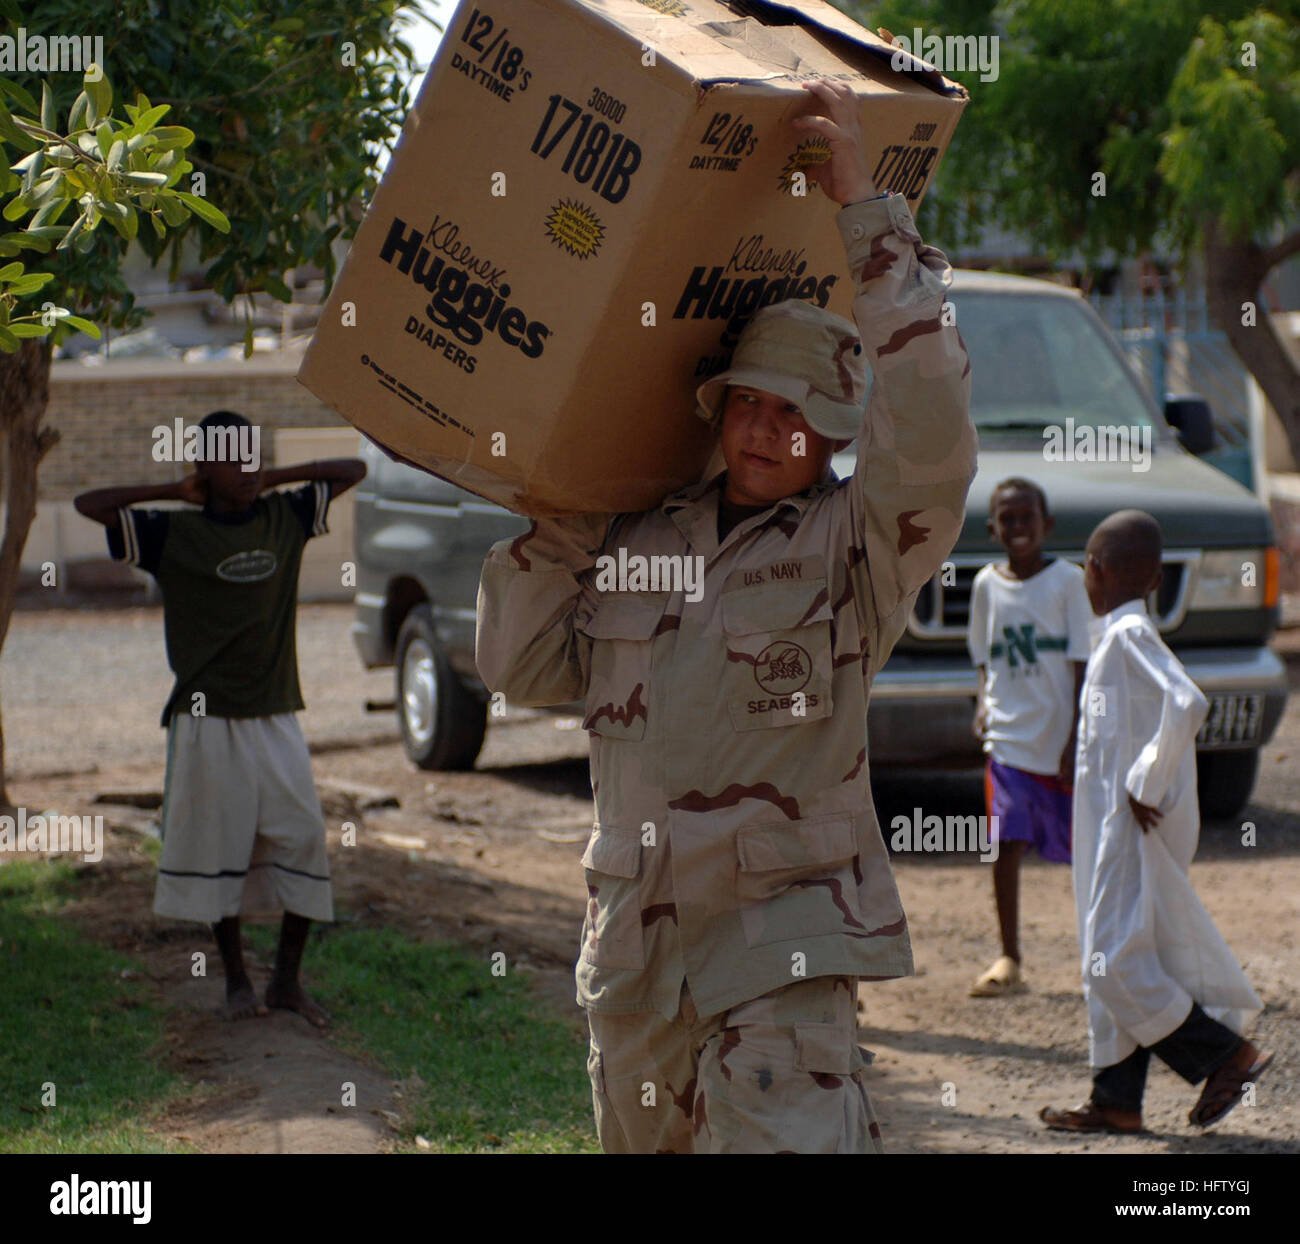 070901-N-1003P-007 DJIBOUTI (Sept. 1, 2007) - Equipment Operator 3rd Class Robert Shepherd, Naval Mobile Construction Battalion (NMCB) 40, carries a box of supplies into Centre De Sante Communautaire Arnaud medical facility. U.S. Navy photo by Mass Communication Specialist 1st Class Mary Popejoy (RELEASED) US Navy 070901-N-1003P-007 Equipment Operator 3rd Class Robert Shepherd, Naval Mobile Construction Battalion (NMCB) 40, carries a box of supplies into Centre De Sante Communautaire Arnaud medical facility Stock Photo